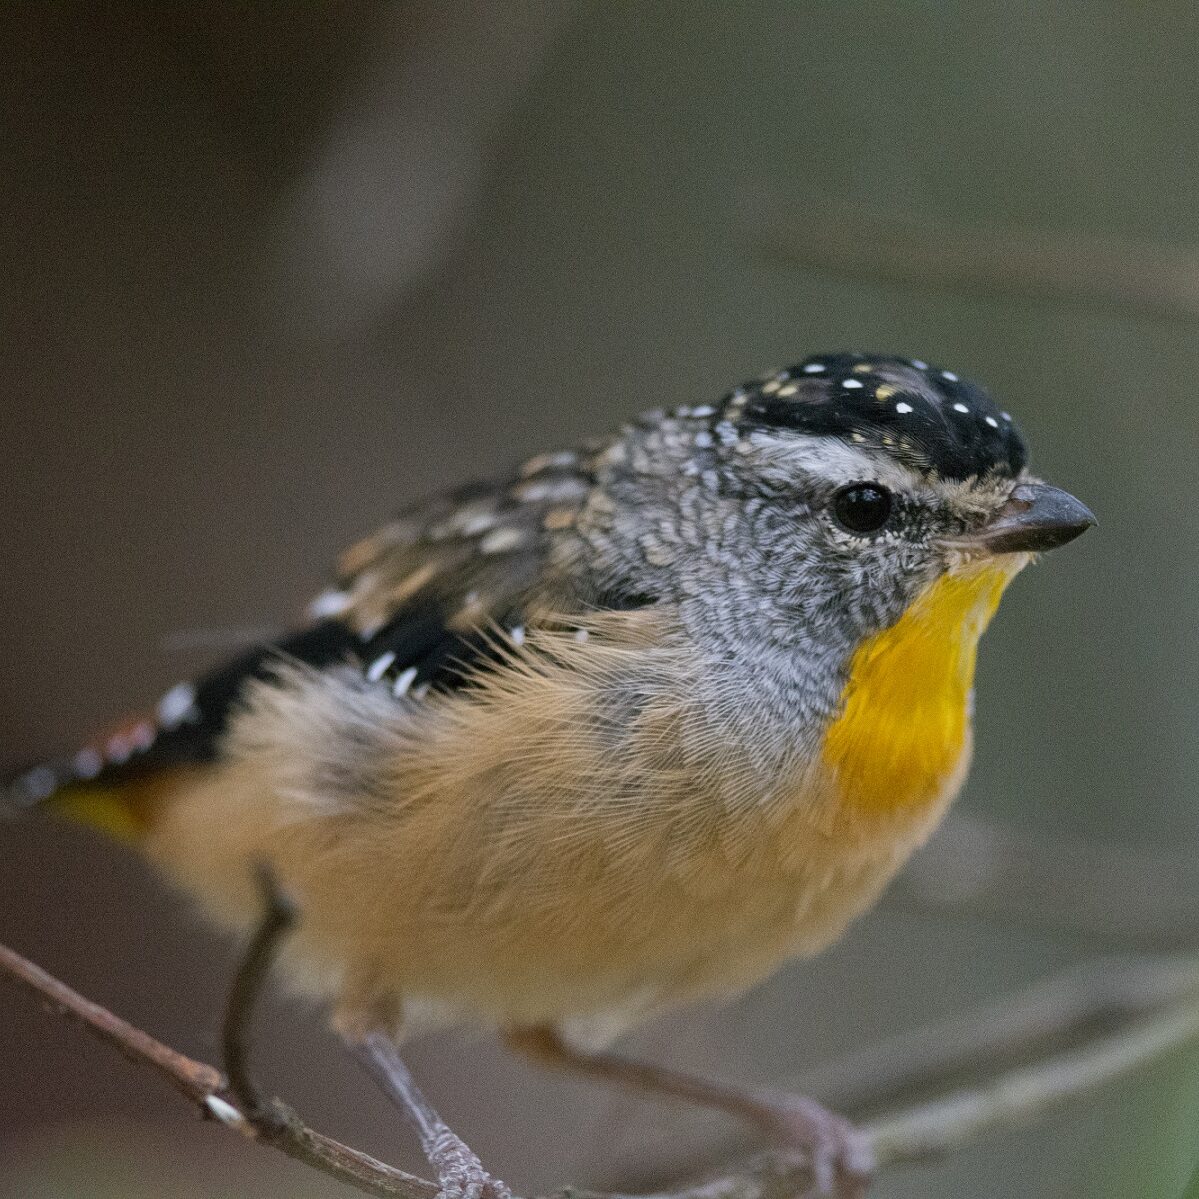 https://www.barwonbluff.com.au/wp-content/uploads/2022/11/Spotted-Pardalote-Lachlan-Forbes-edited.jpg